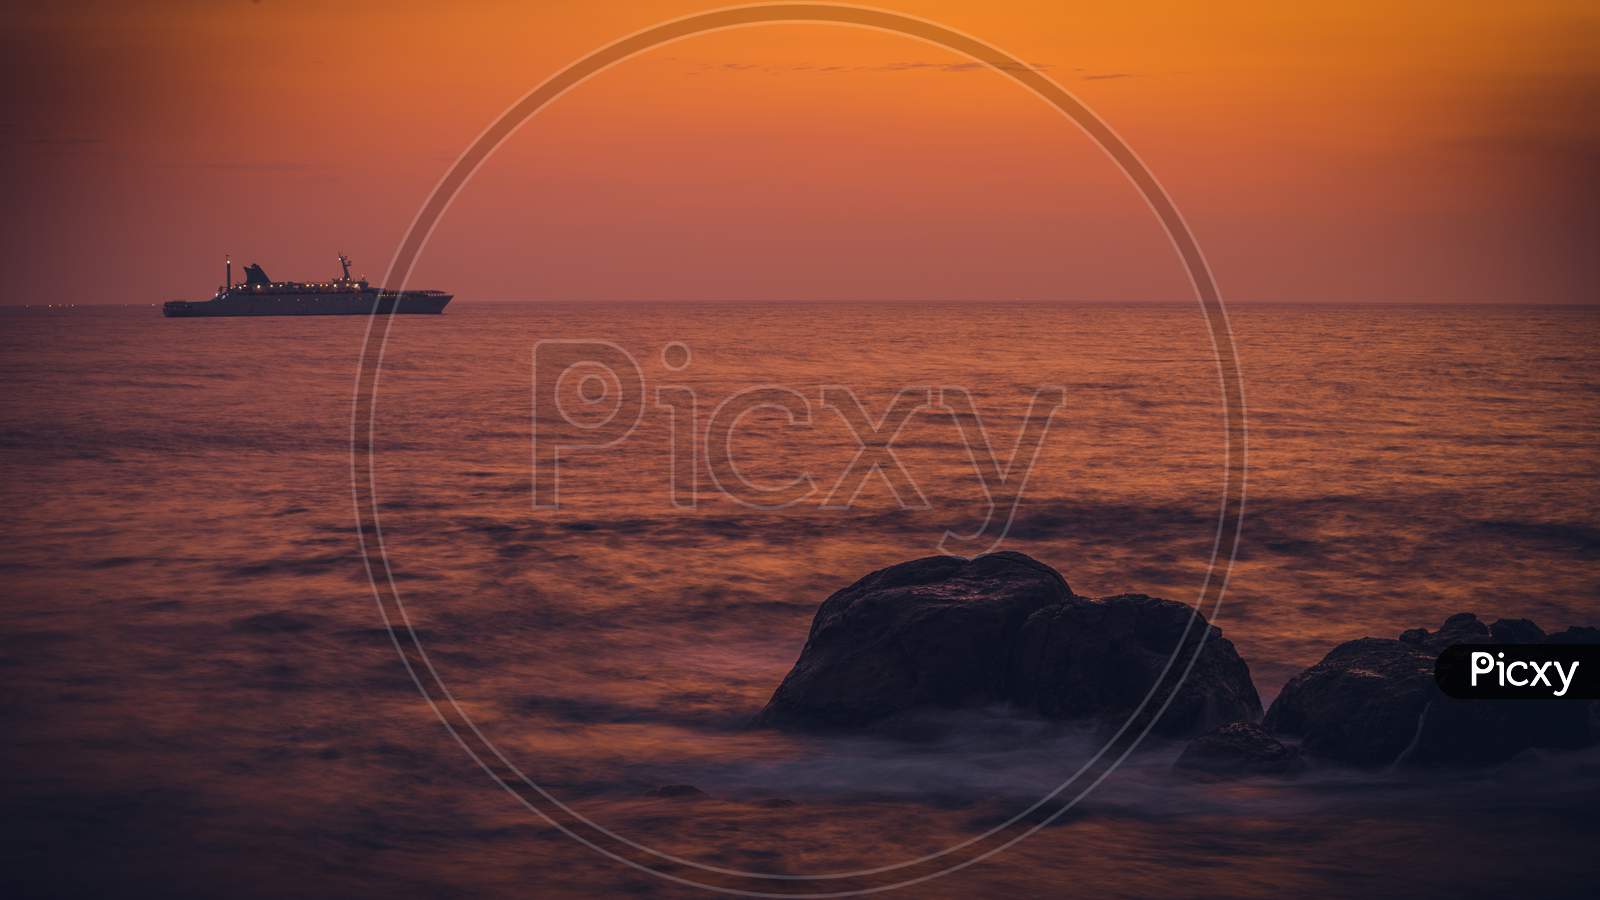 Colorful Sunset View From Galle Dutch Fort Evening, Sailboat In The Horizon, After Sundown Bright Orange And Yellow Skies, Long Exposure Photograph.